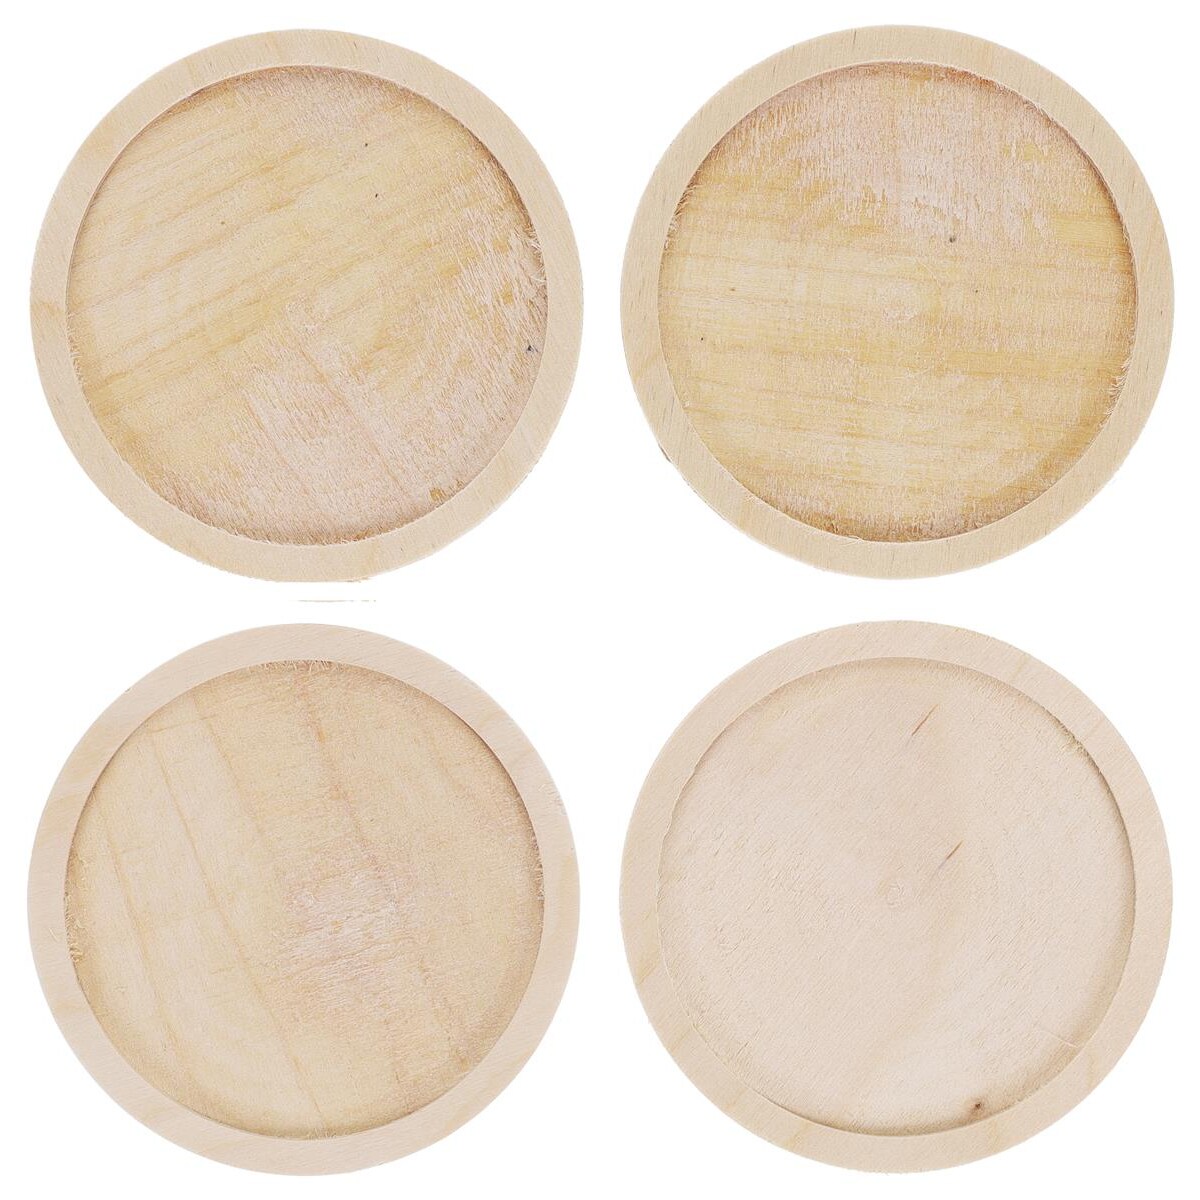 Welled Wood Coaster Circle with Circle 4&#x22;, 4 piece, for wooden coasters, crafts and decorations, welled center for resin design or paint - for decoupage, engraving, wood burning